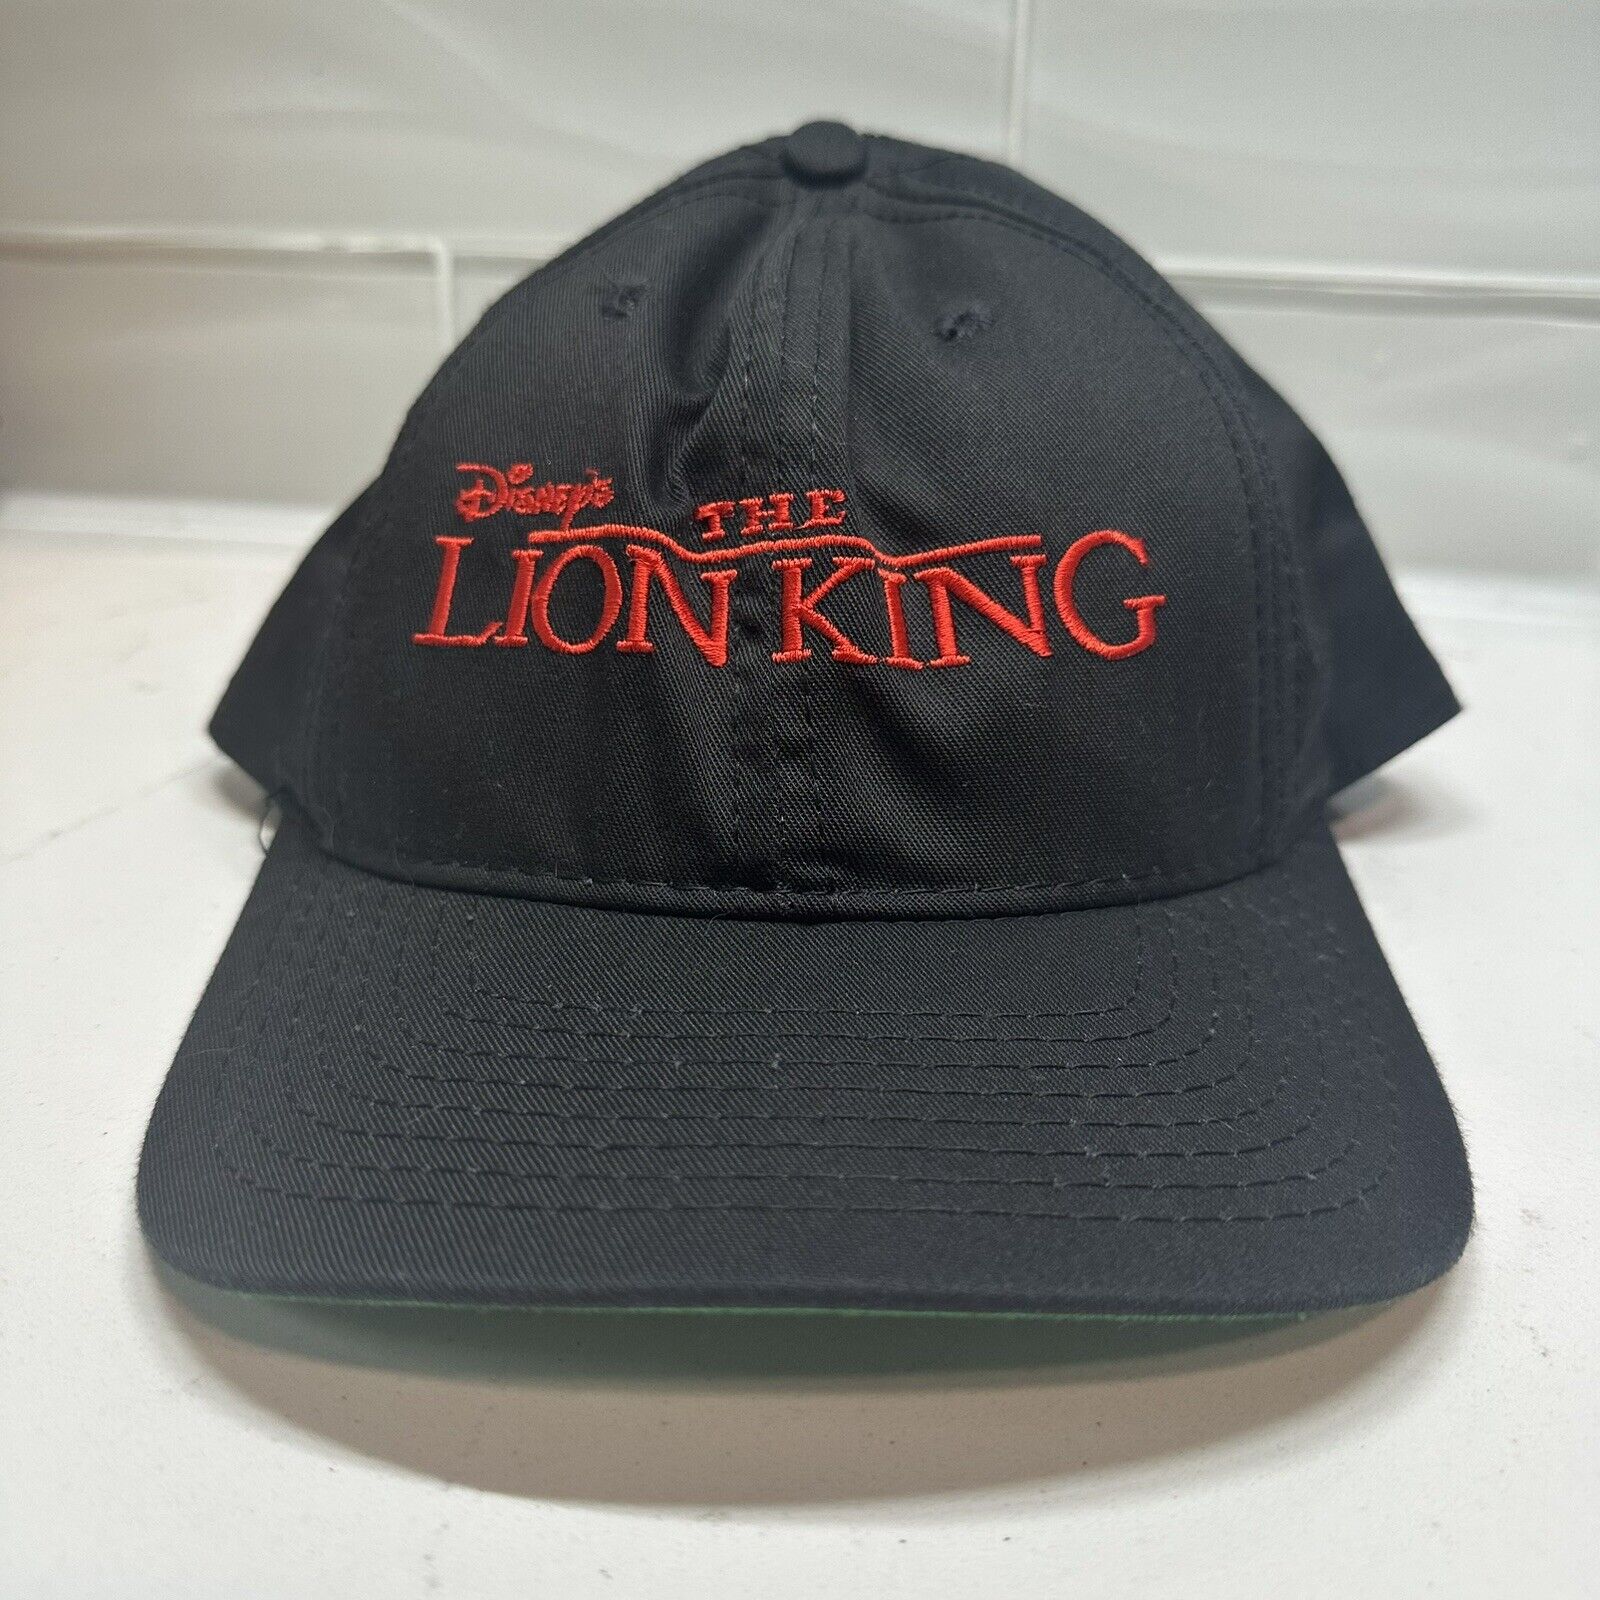 Vintage 1990’s The Lion King Marquee Logo Black Snapback Cap Goofy’s Hat Co.